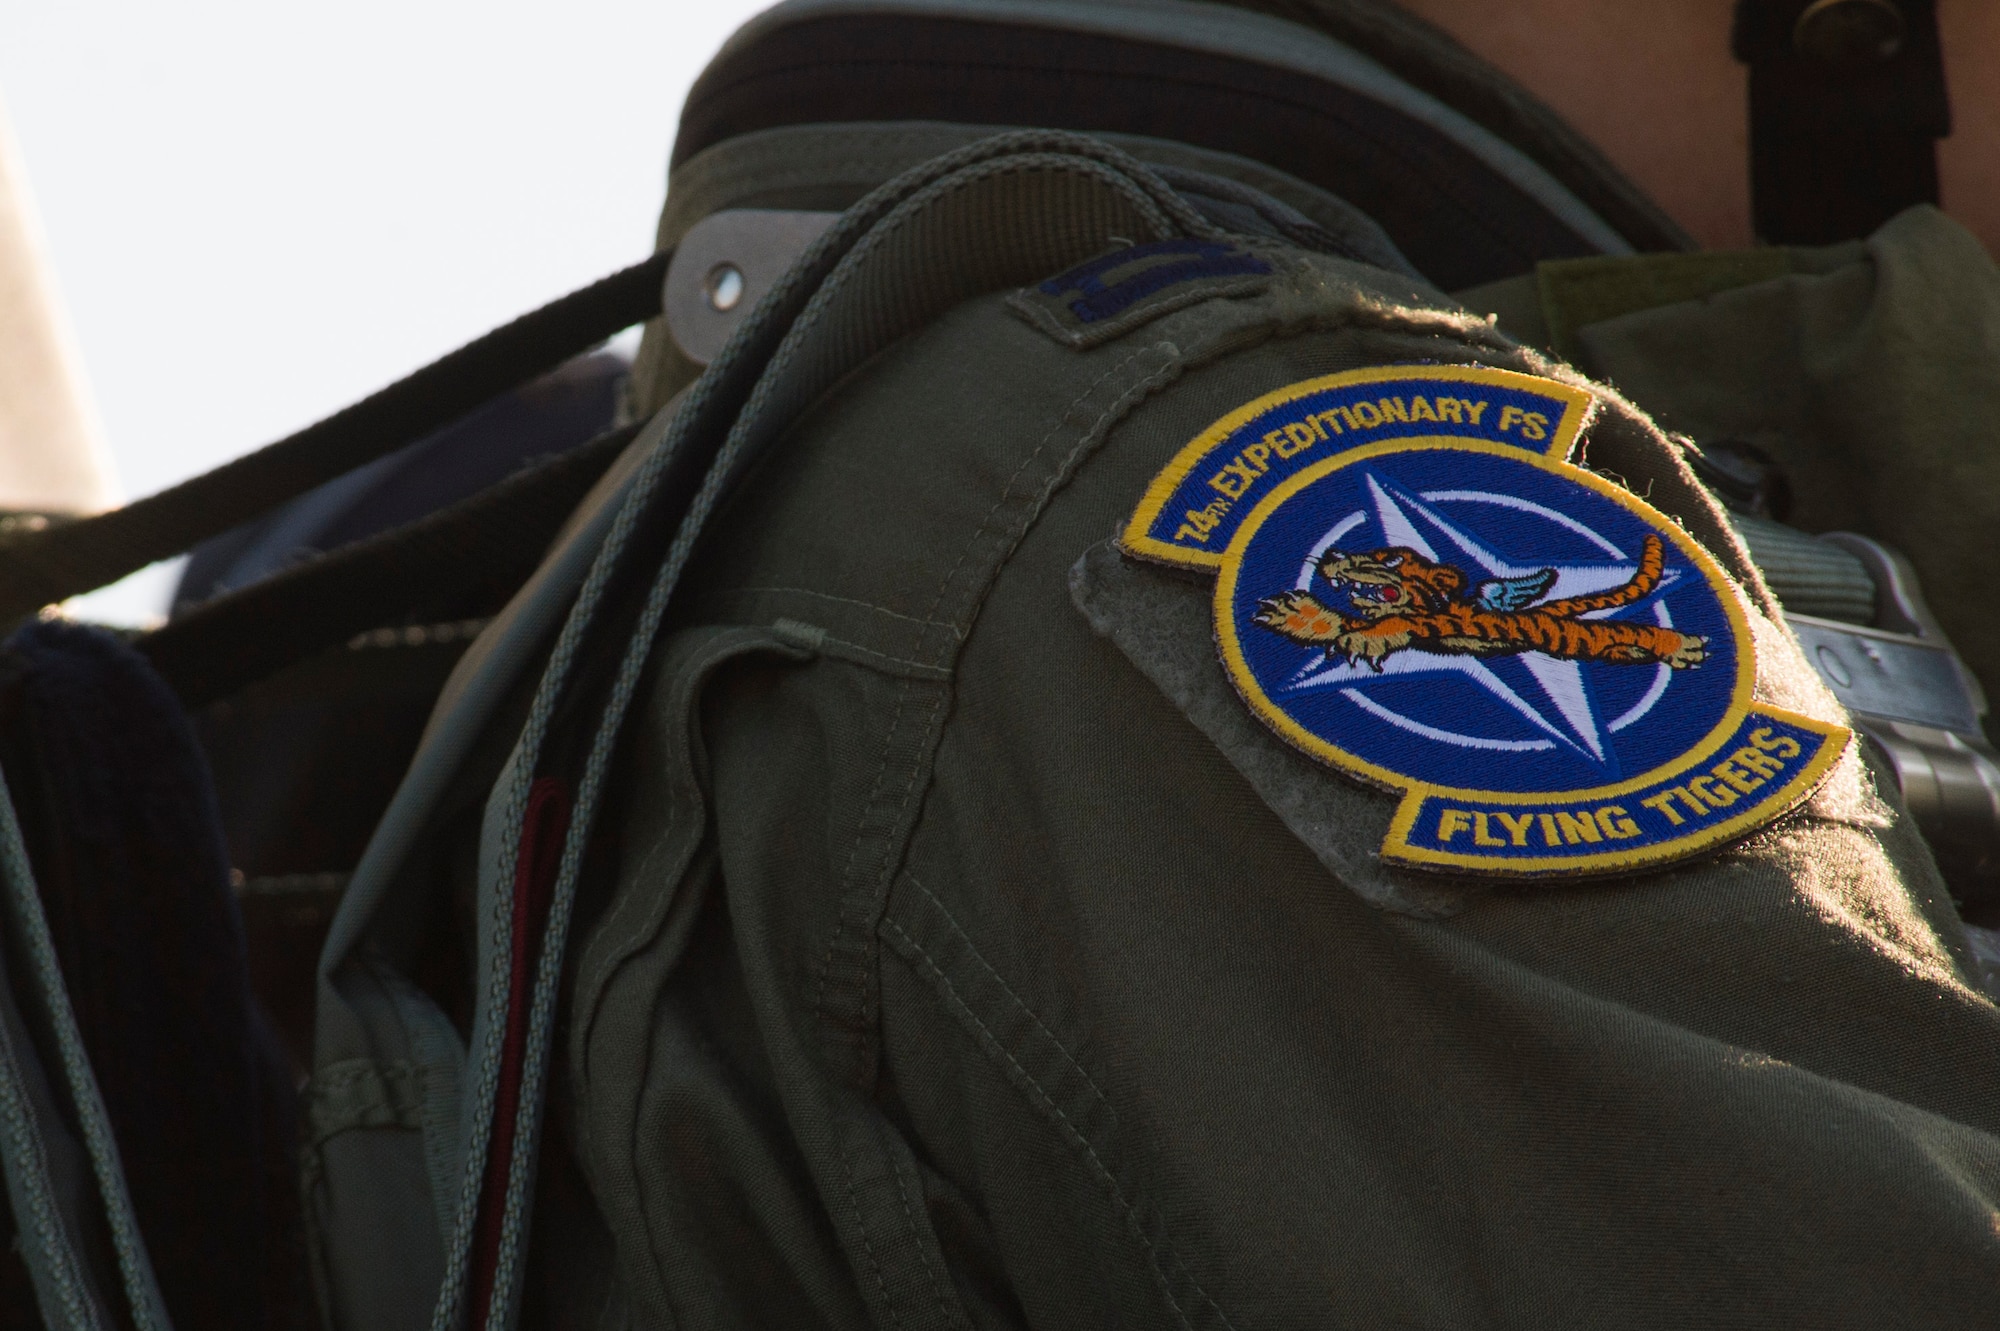 A 74th Expeditionary Fighter Squadron patch is displayed on the shoulder of U.S. Air Force Capt. Chandra Fleming, a 74th EFS A-10 Thunderbolt II pilot, during the 74th EFS’s deployment in support of Operation Atlantic Resolve at Graf Ignatievo, Bulgaria, March 18, 2016. The patch incorporates the squadron’s legacy which dates back to the original ‘Flying Tigers’ who served in the Burma-Indo-China Theater during World War II. (U.S. Air Force photo by Staff Sgt. Joe W. McFadden/Released)